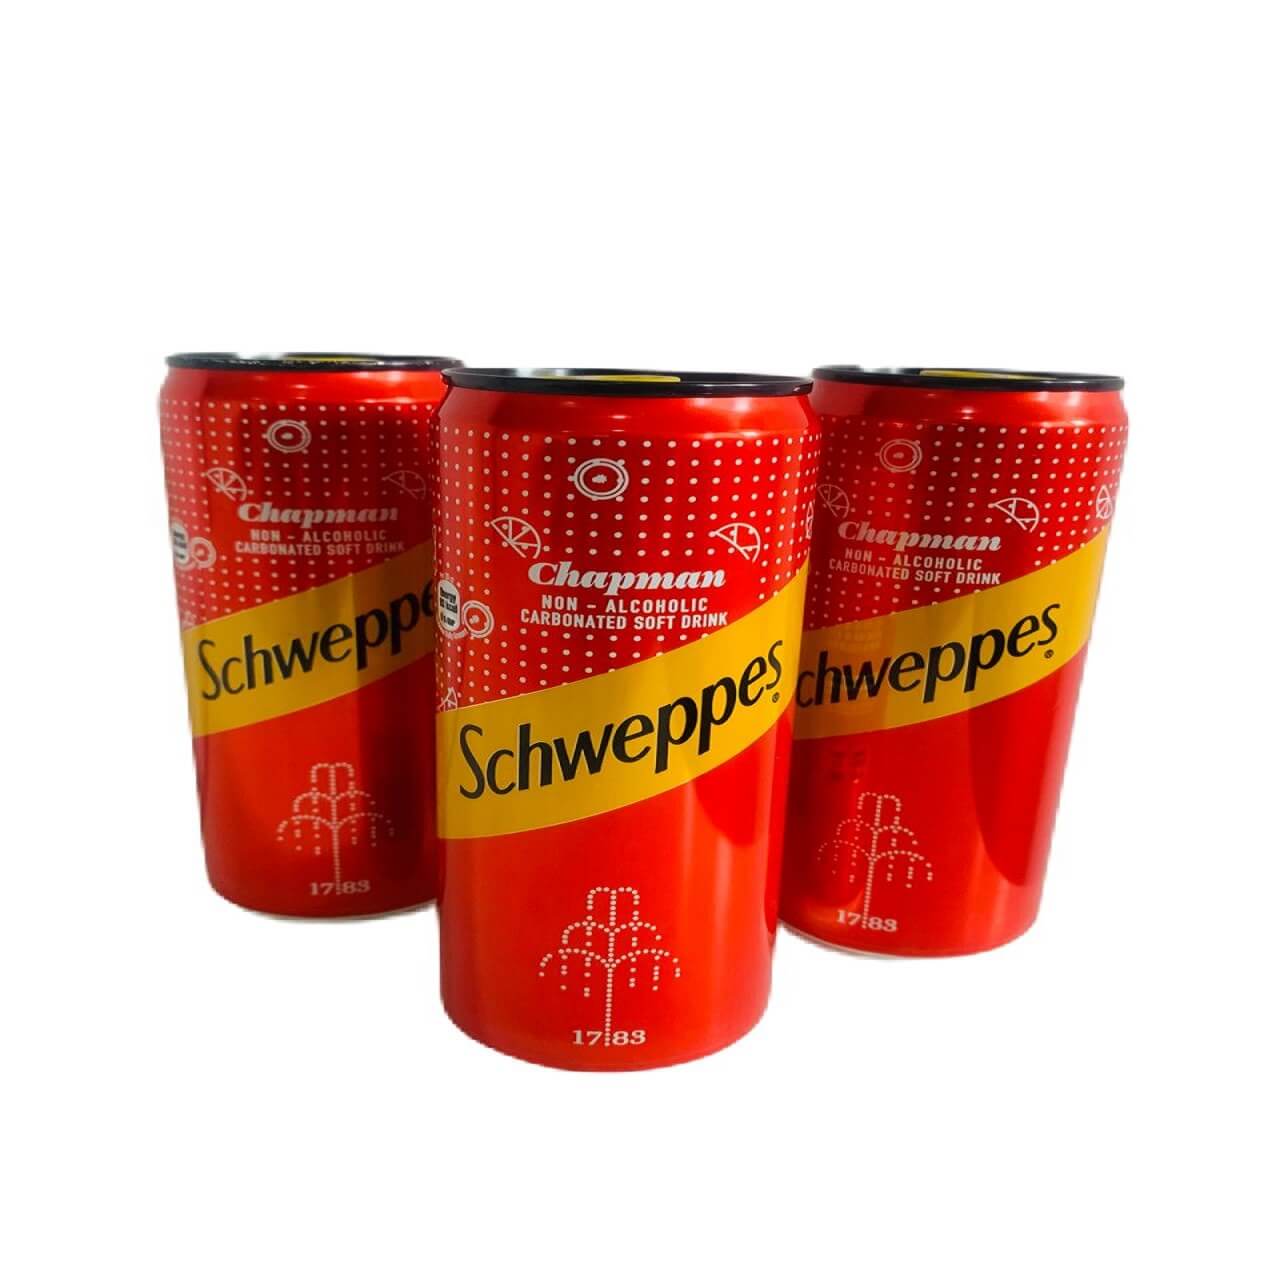 3 cans of schweppes chapman